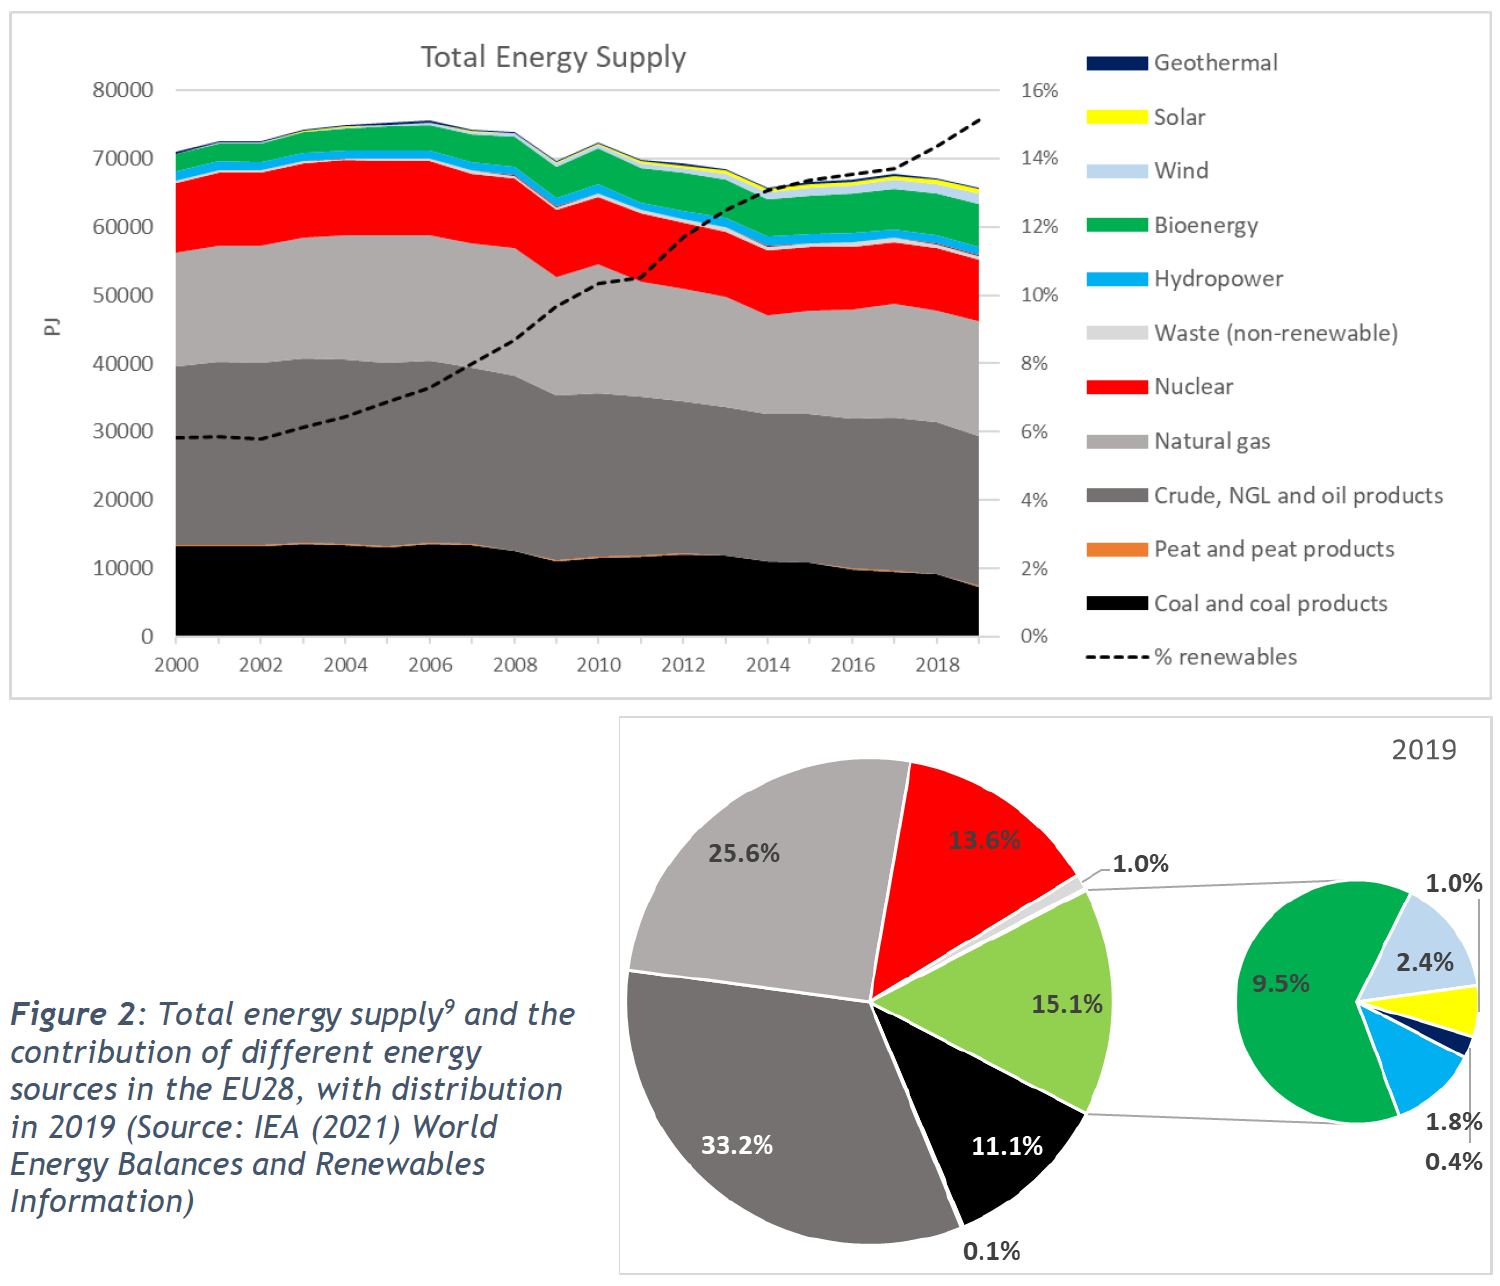 Total energy supply (TES) of the EU28